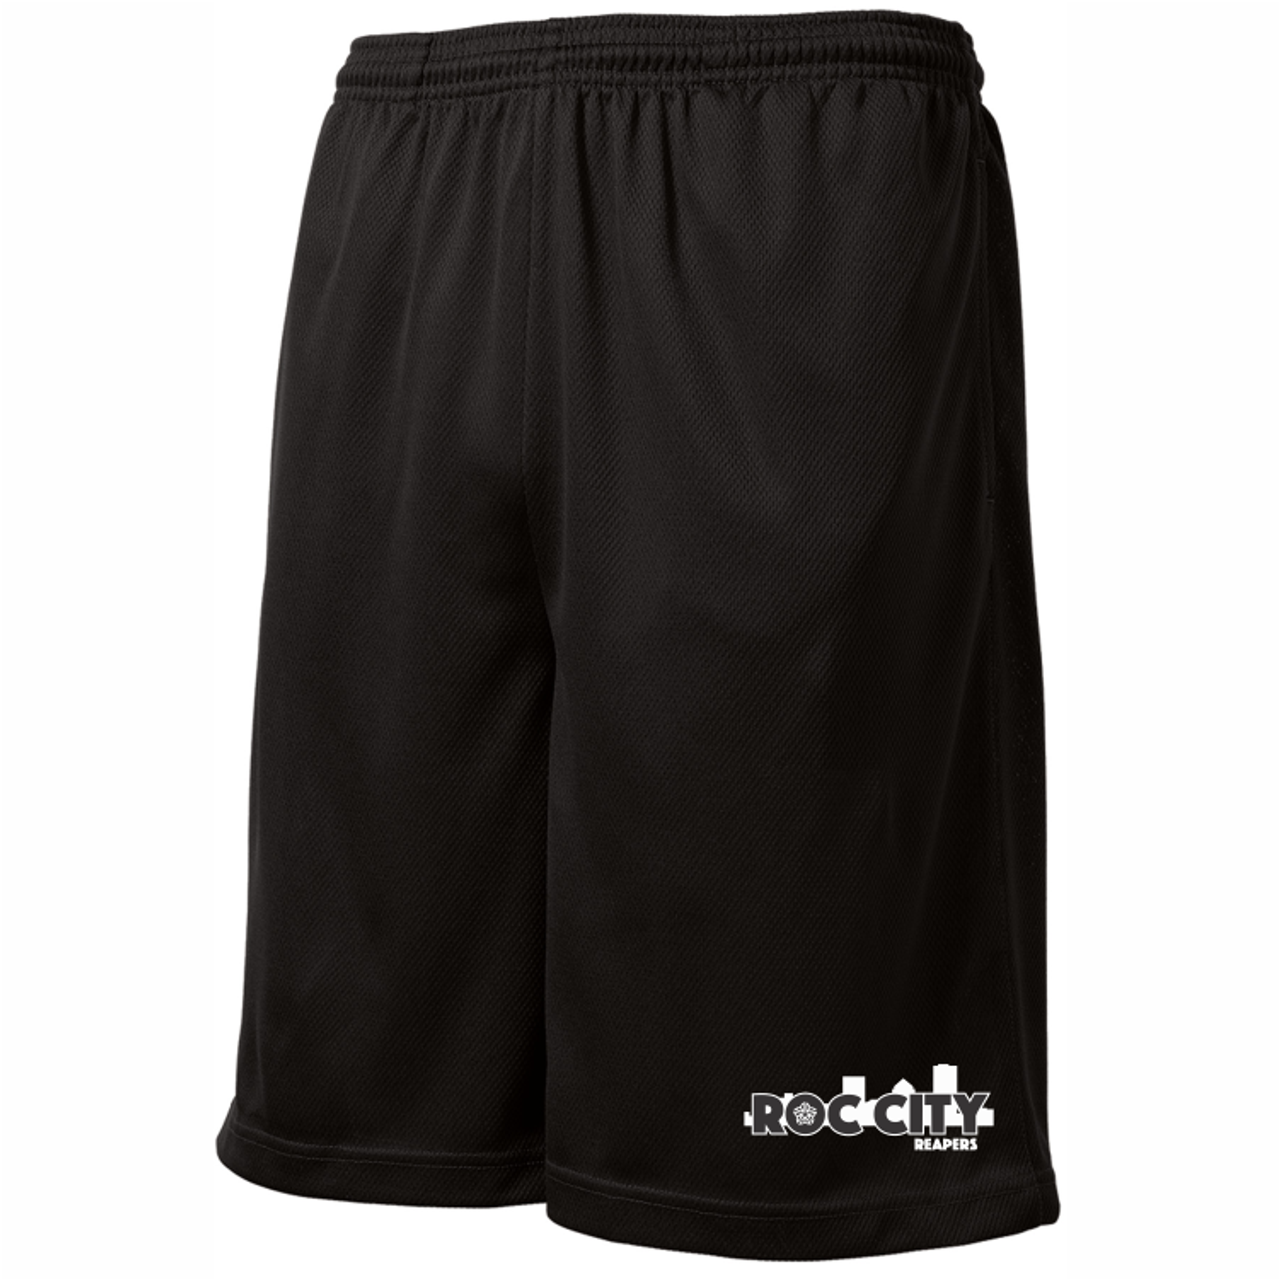 Roc City Reapers Rugby Athletic Shorts